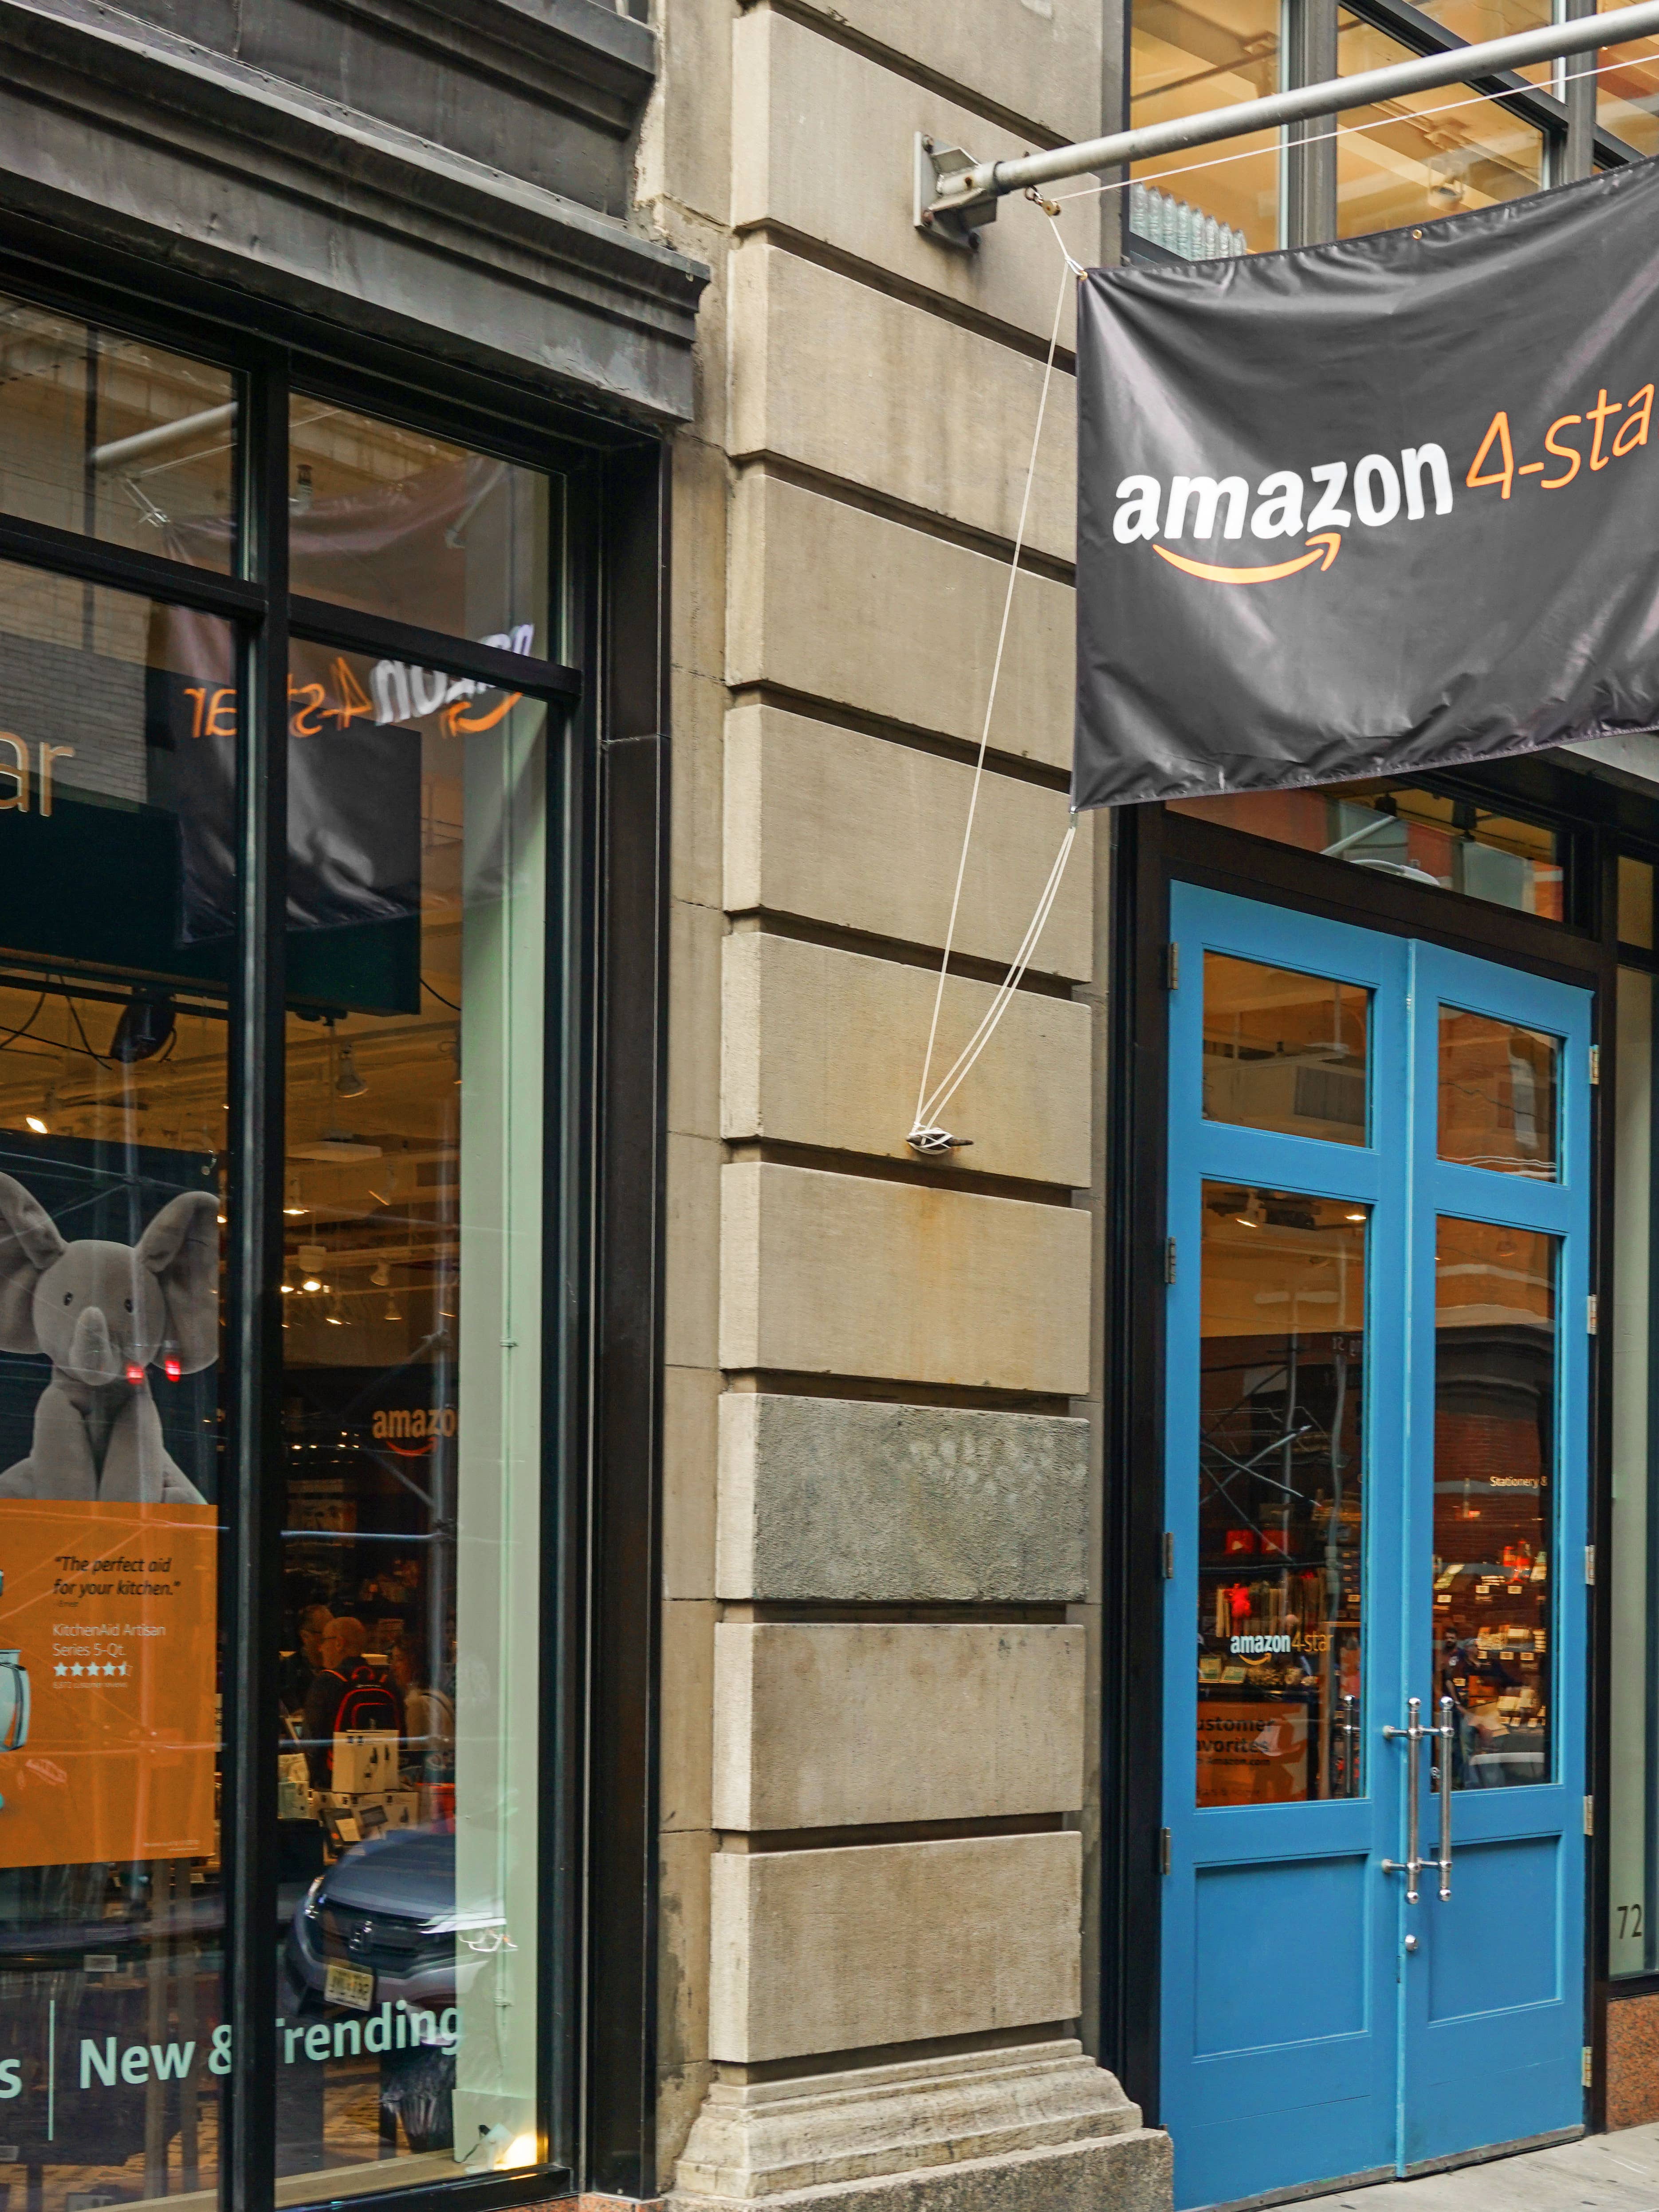 What to Know Before You Visit Amazon’s New NYC Store